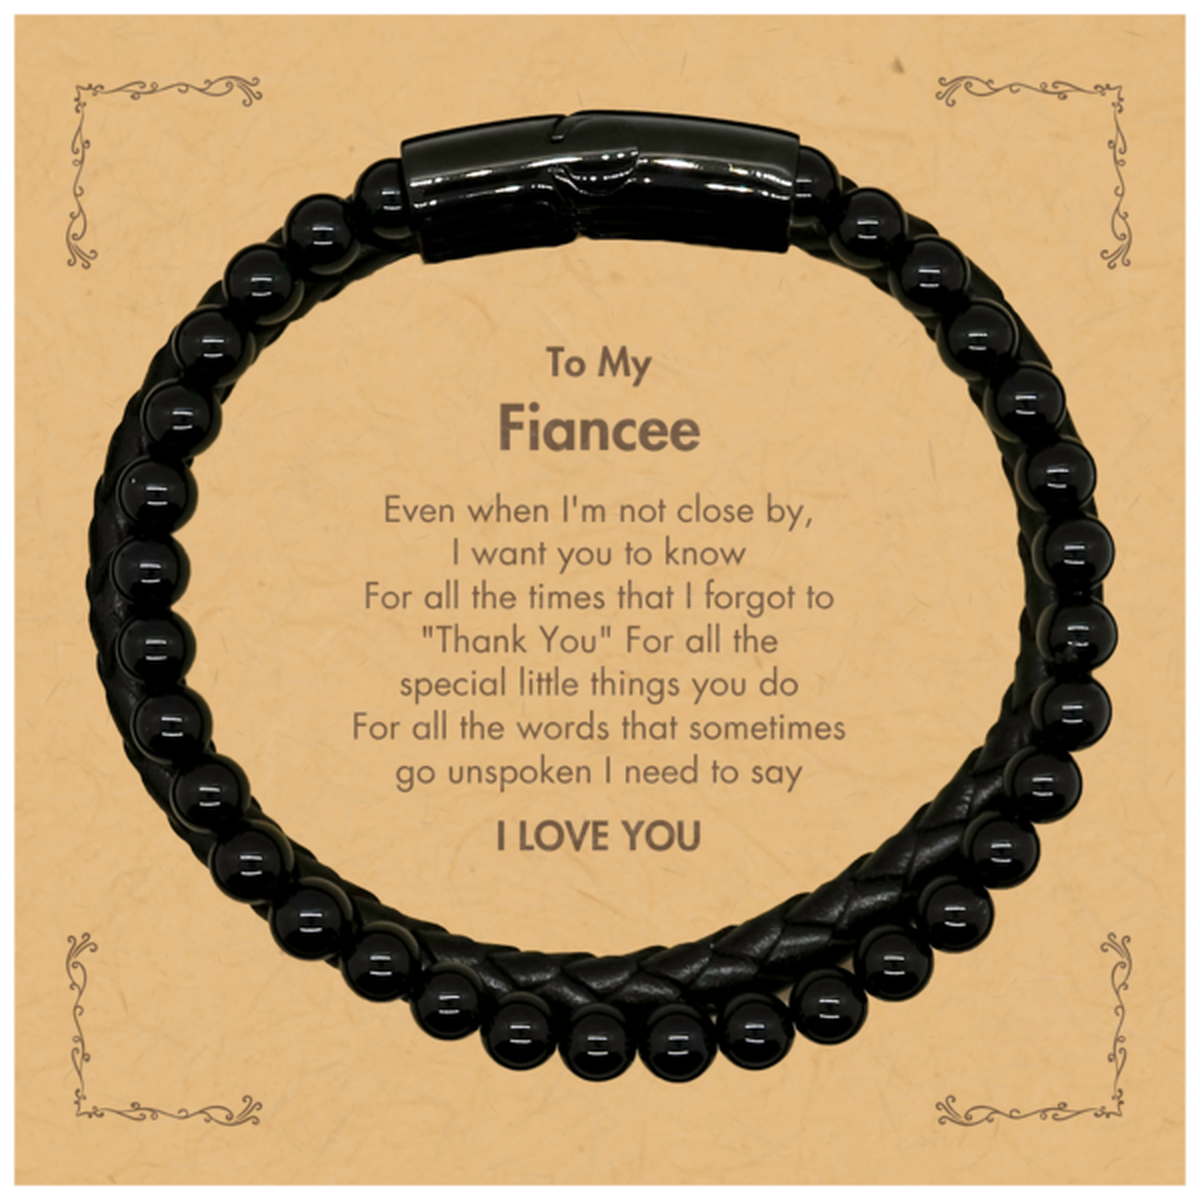 Thank You Gifts for Fiancee, Keepsake Stone Leather Bracelets Gifts for Fiancee Birthday Mother's day Father's Day Fiancee For all the words That sometimes go unspoken I need to say I LOVE YOU